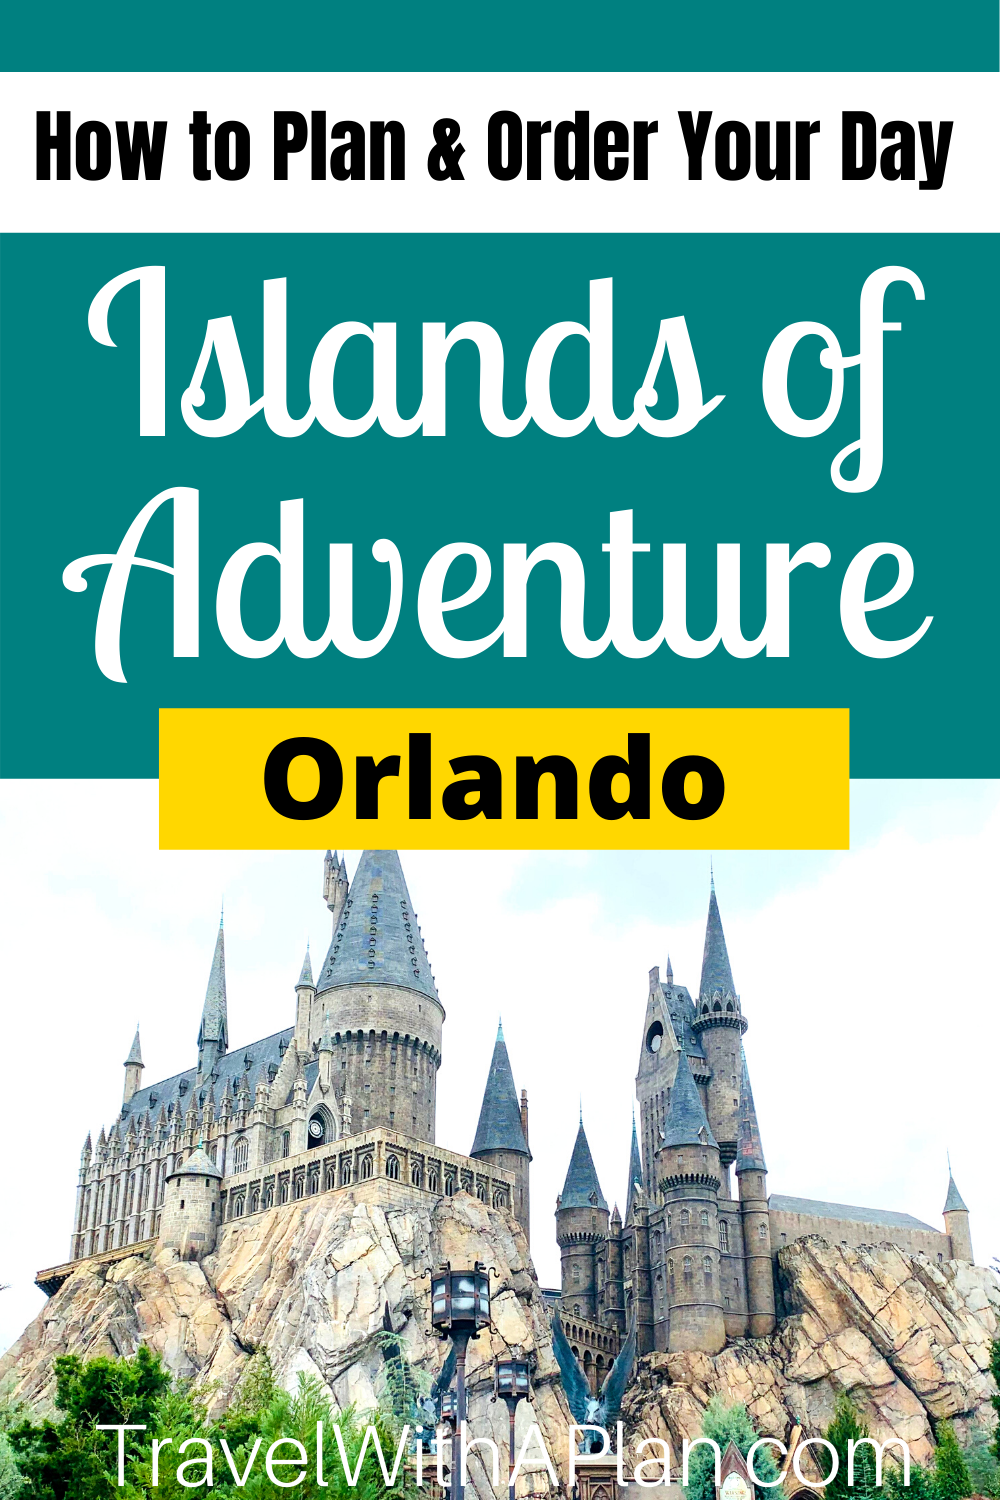 Click here to discover an awesome 1-Day Islands of Adventure touring plan from top US Family Travel Blog, Travel With A Plan!  #UniversalOrlando #familytravel